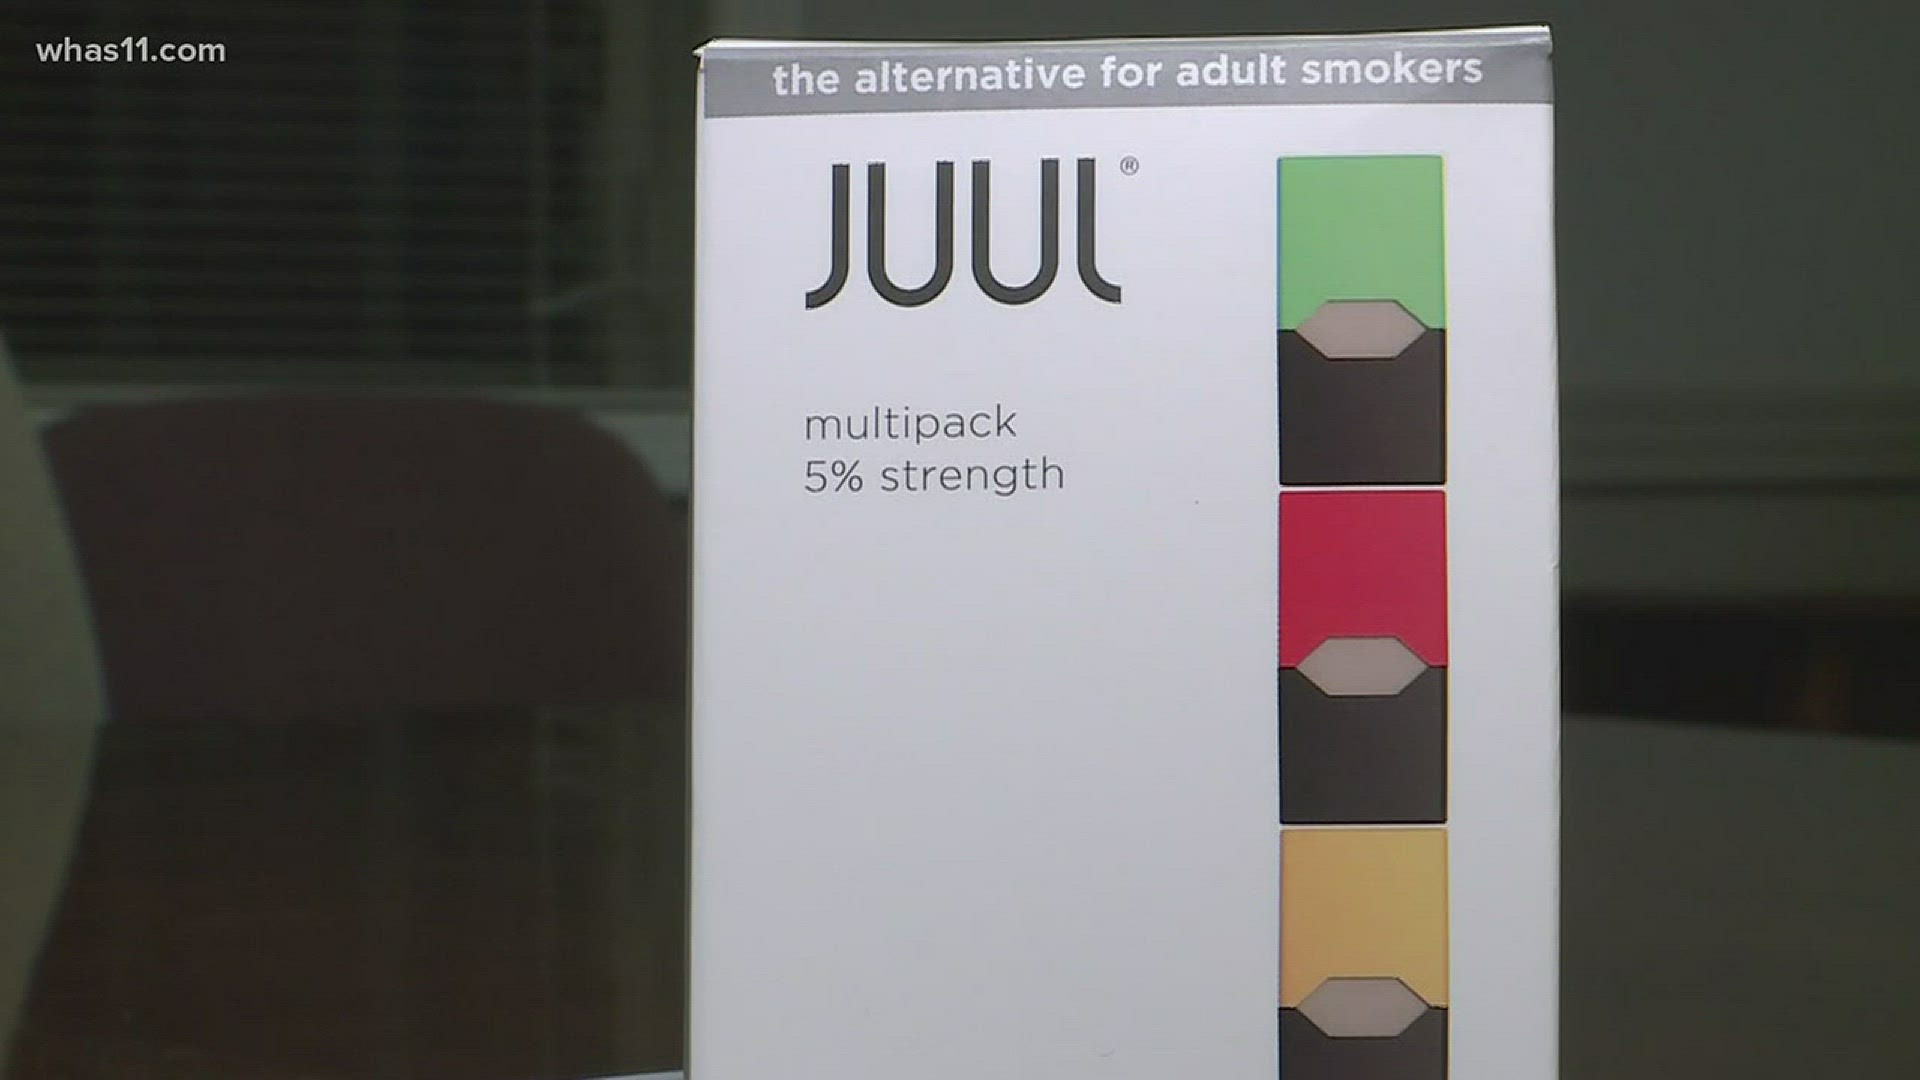 Students and staff in the Oldham County school district have concerns about juuling